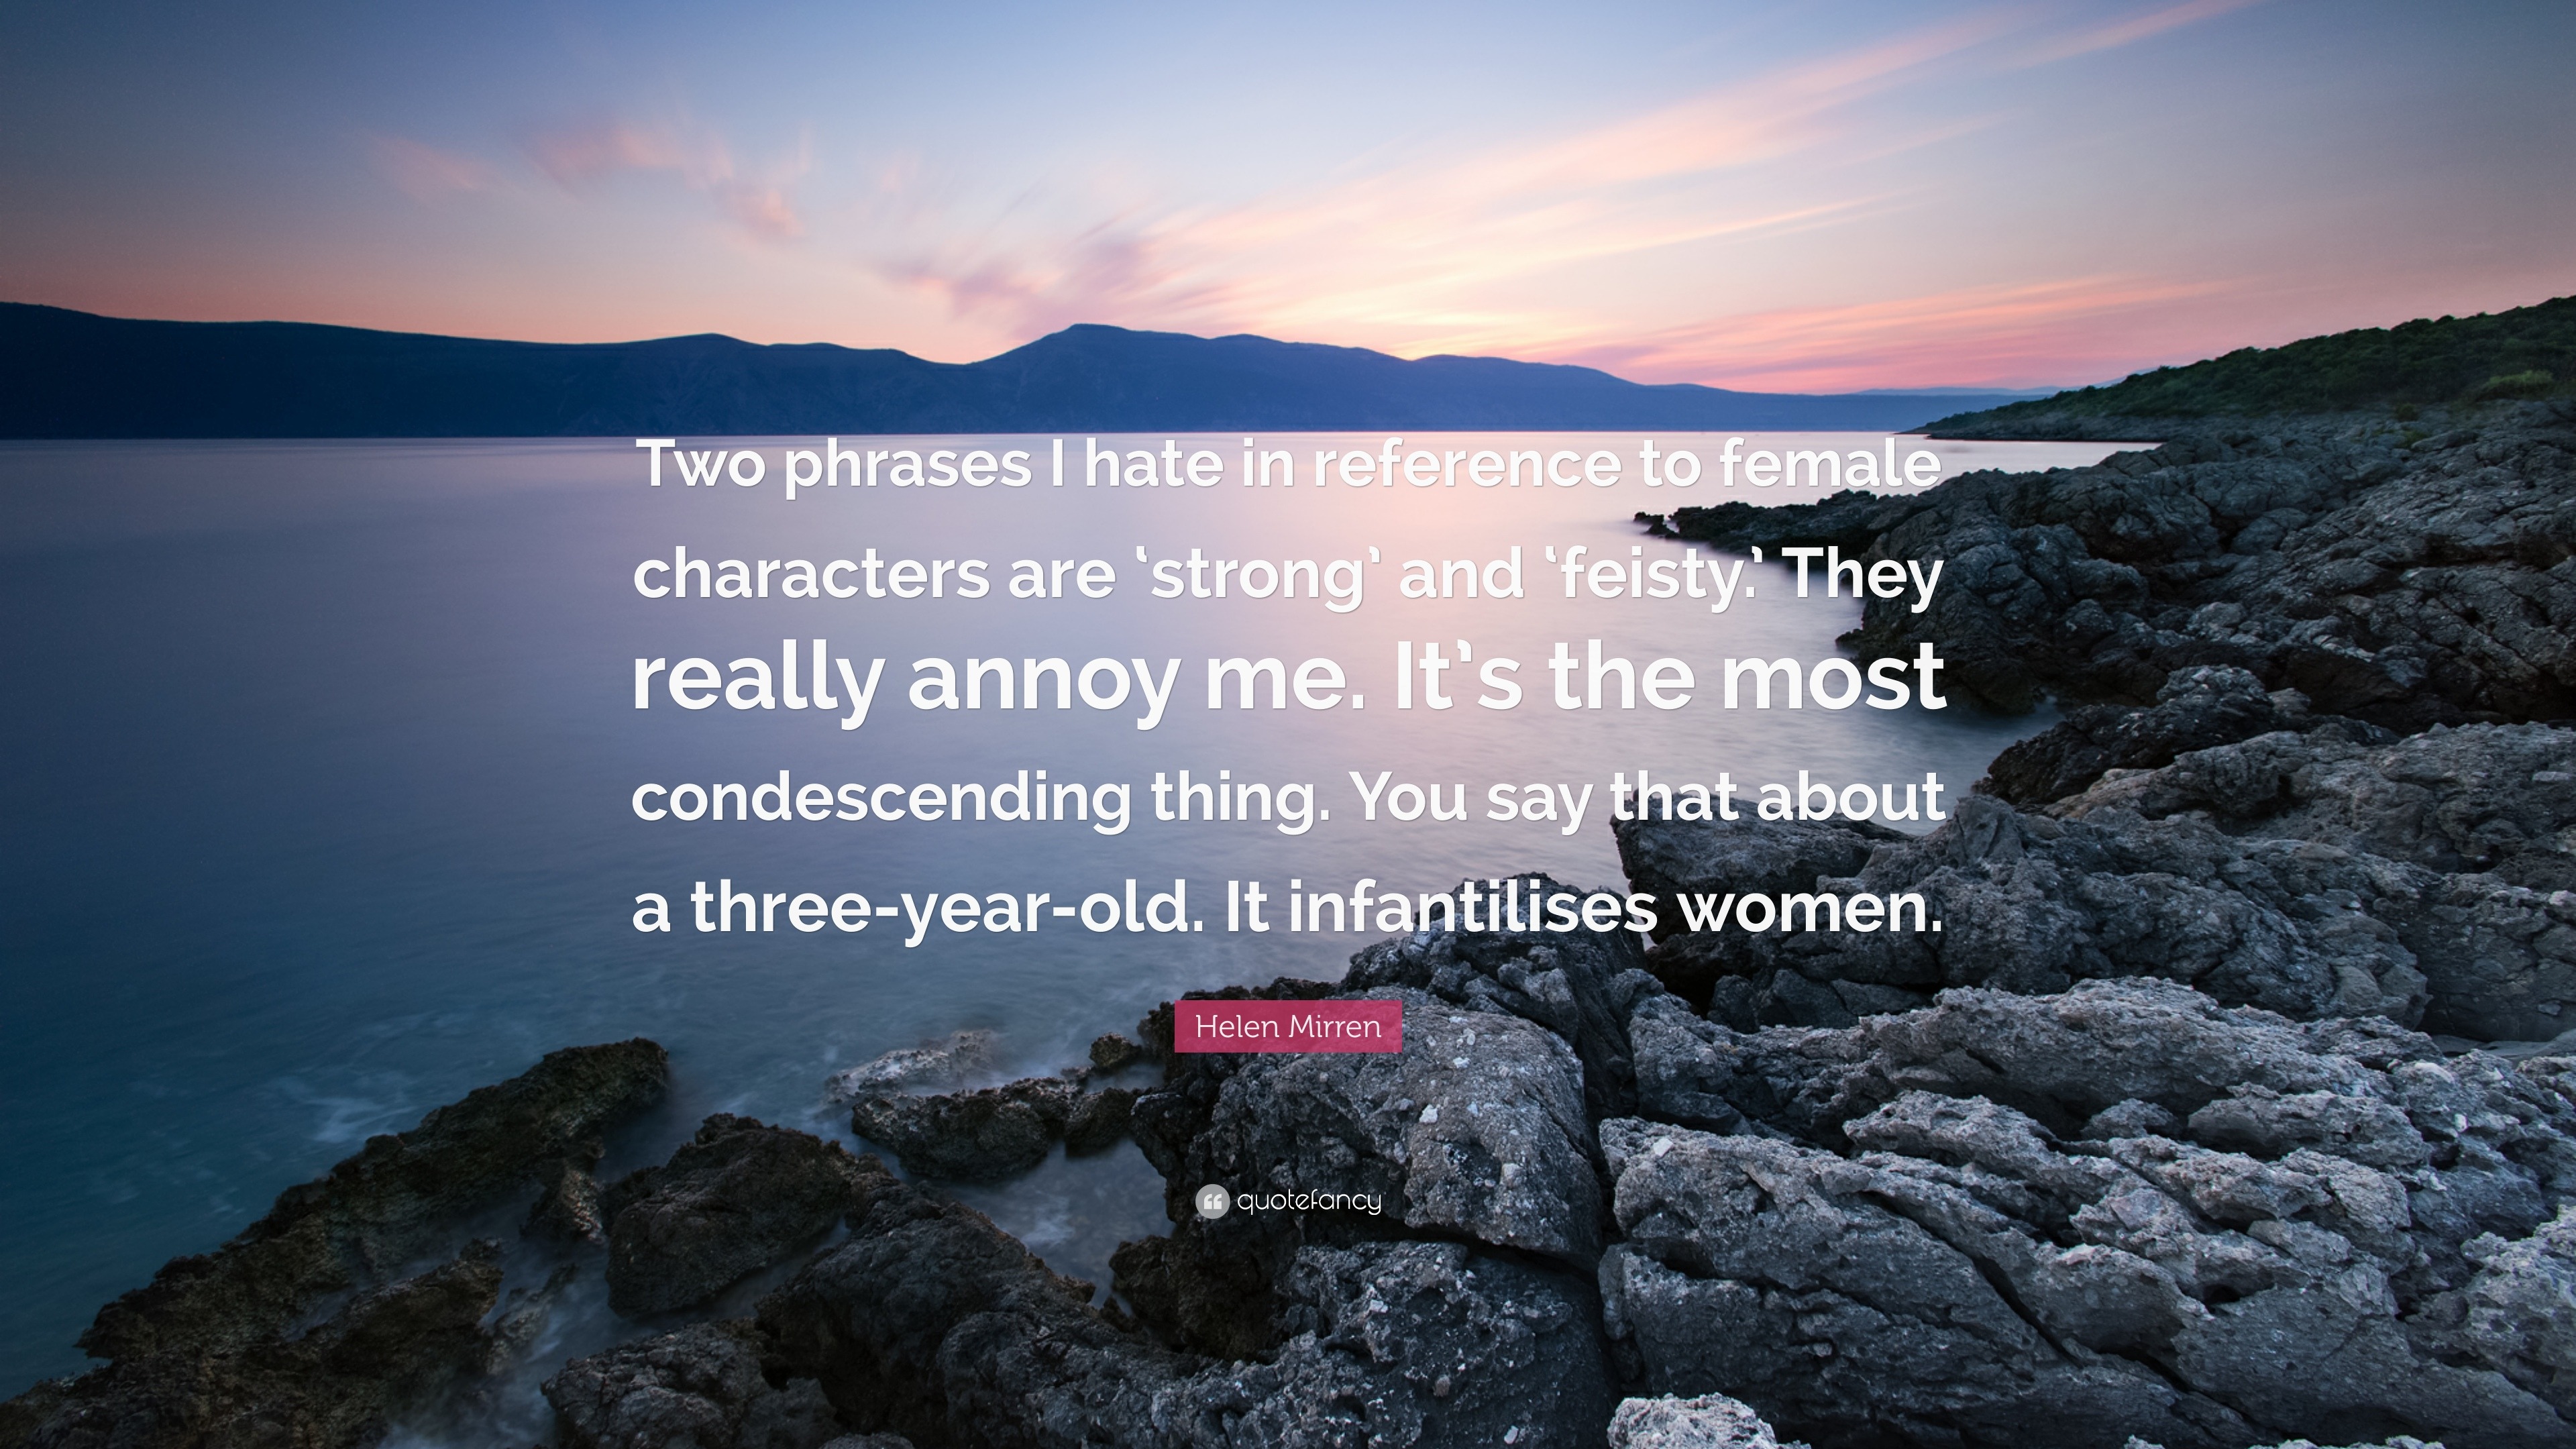 Helen Mirren Quote: “Two phrases I hate in reference to female ...